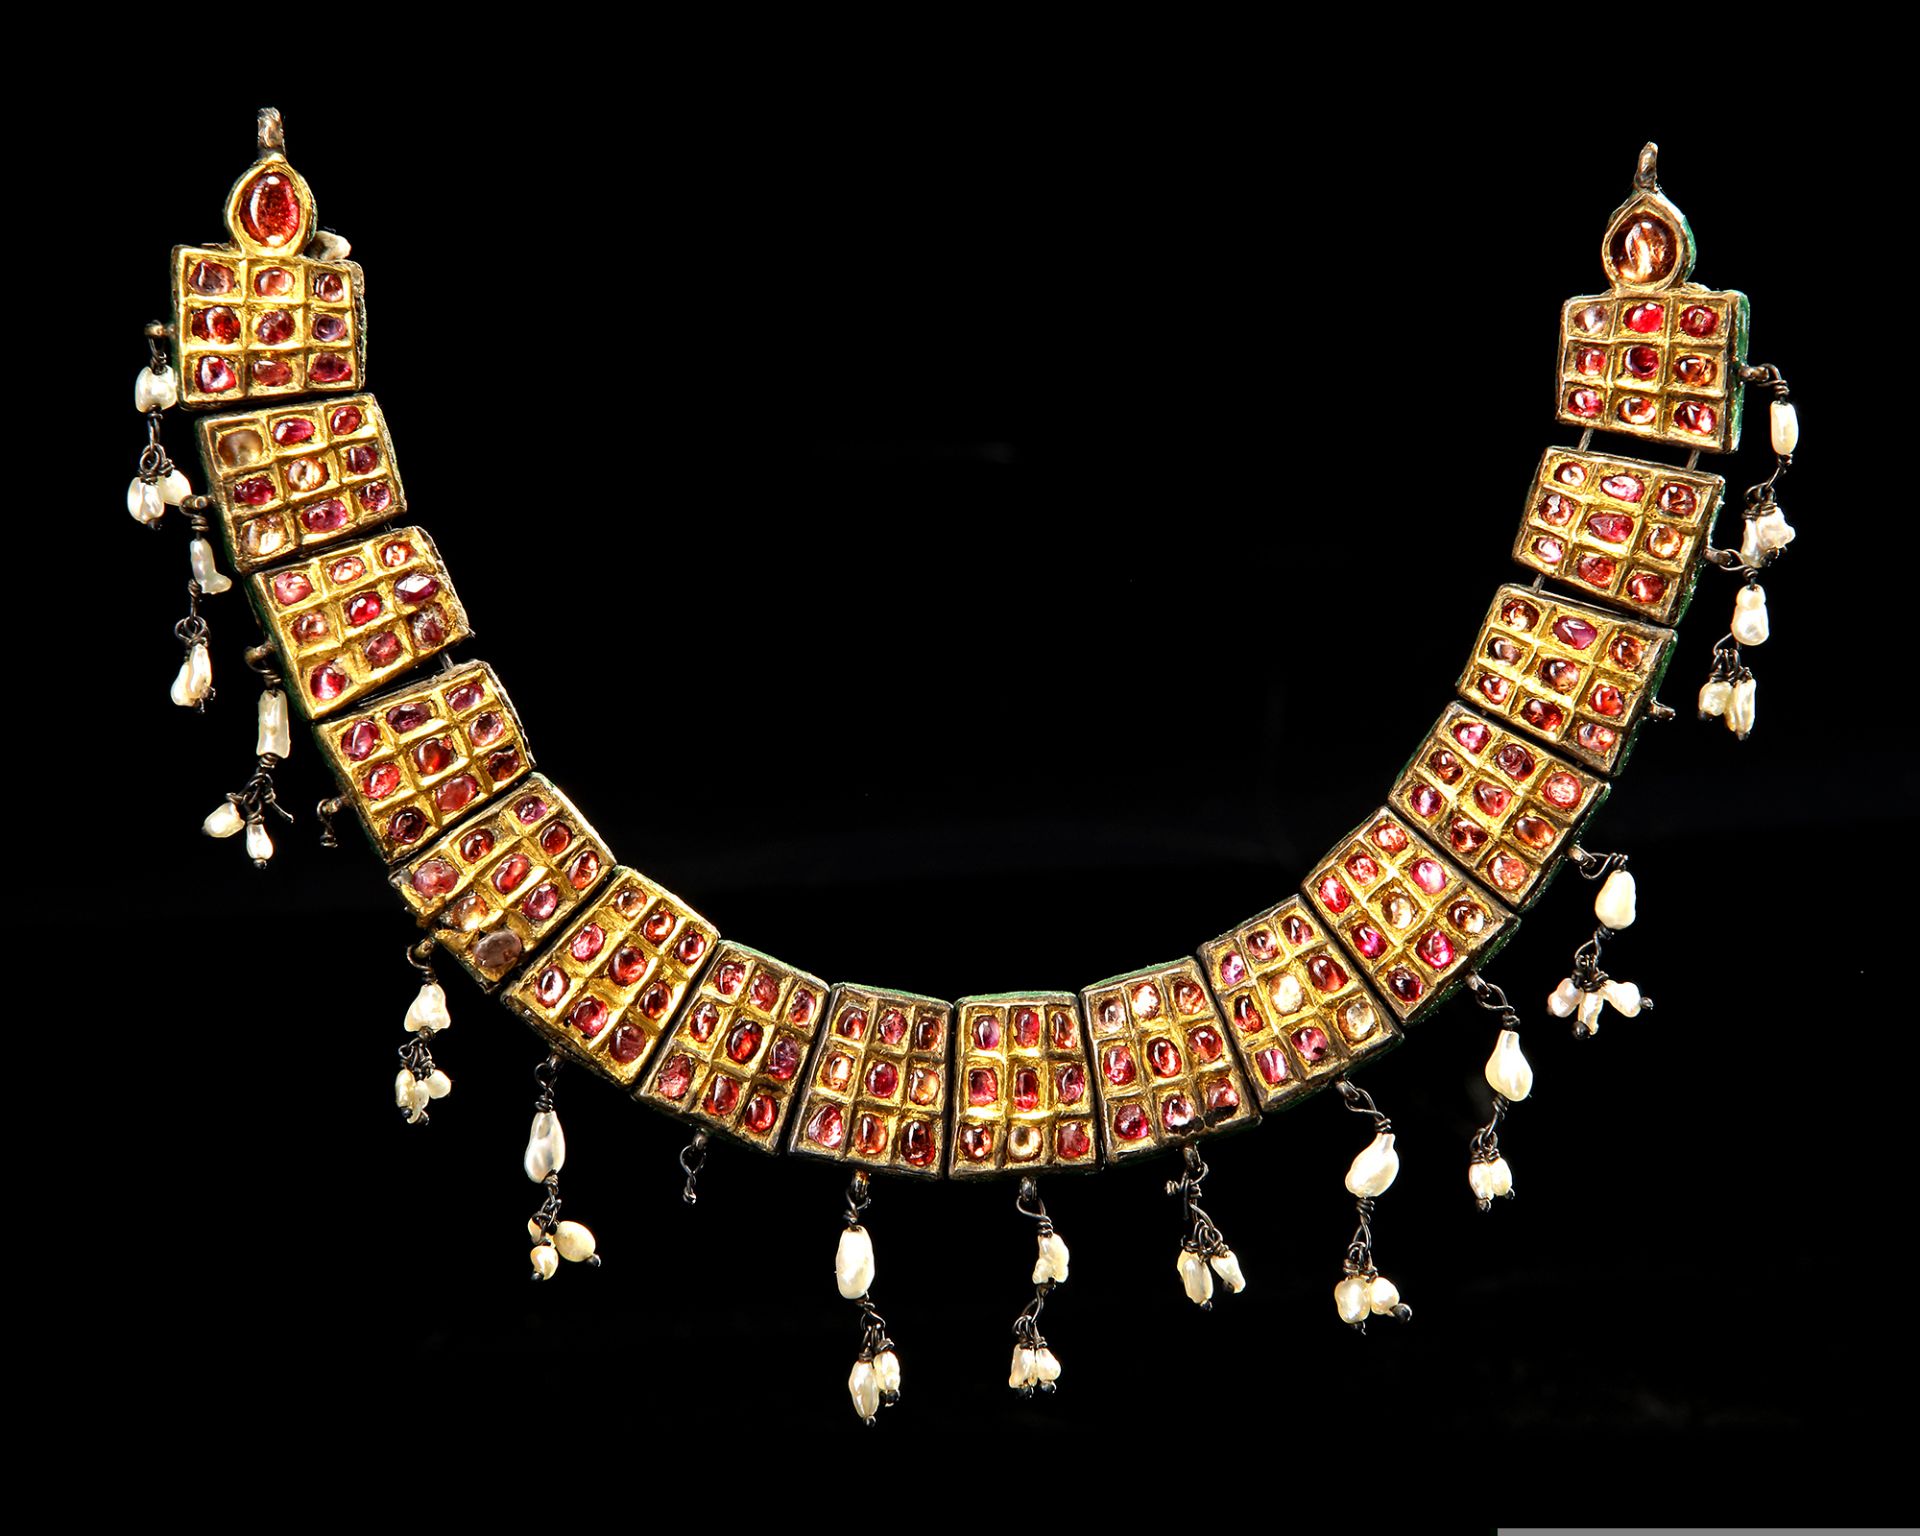 A MUGHAL GEM-SET ENAMELED GOLD NECKLACE, LATE 18TH CENTURY - Image 2 of 6